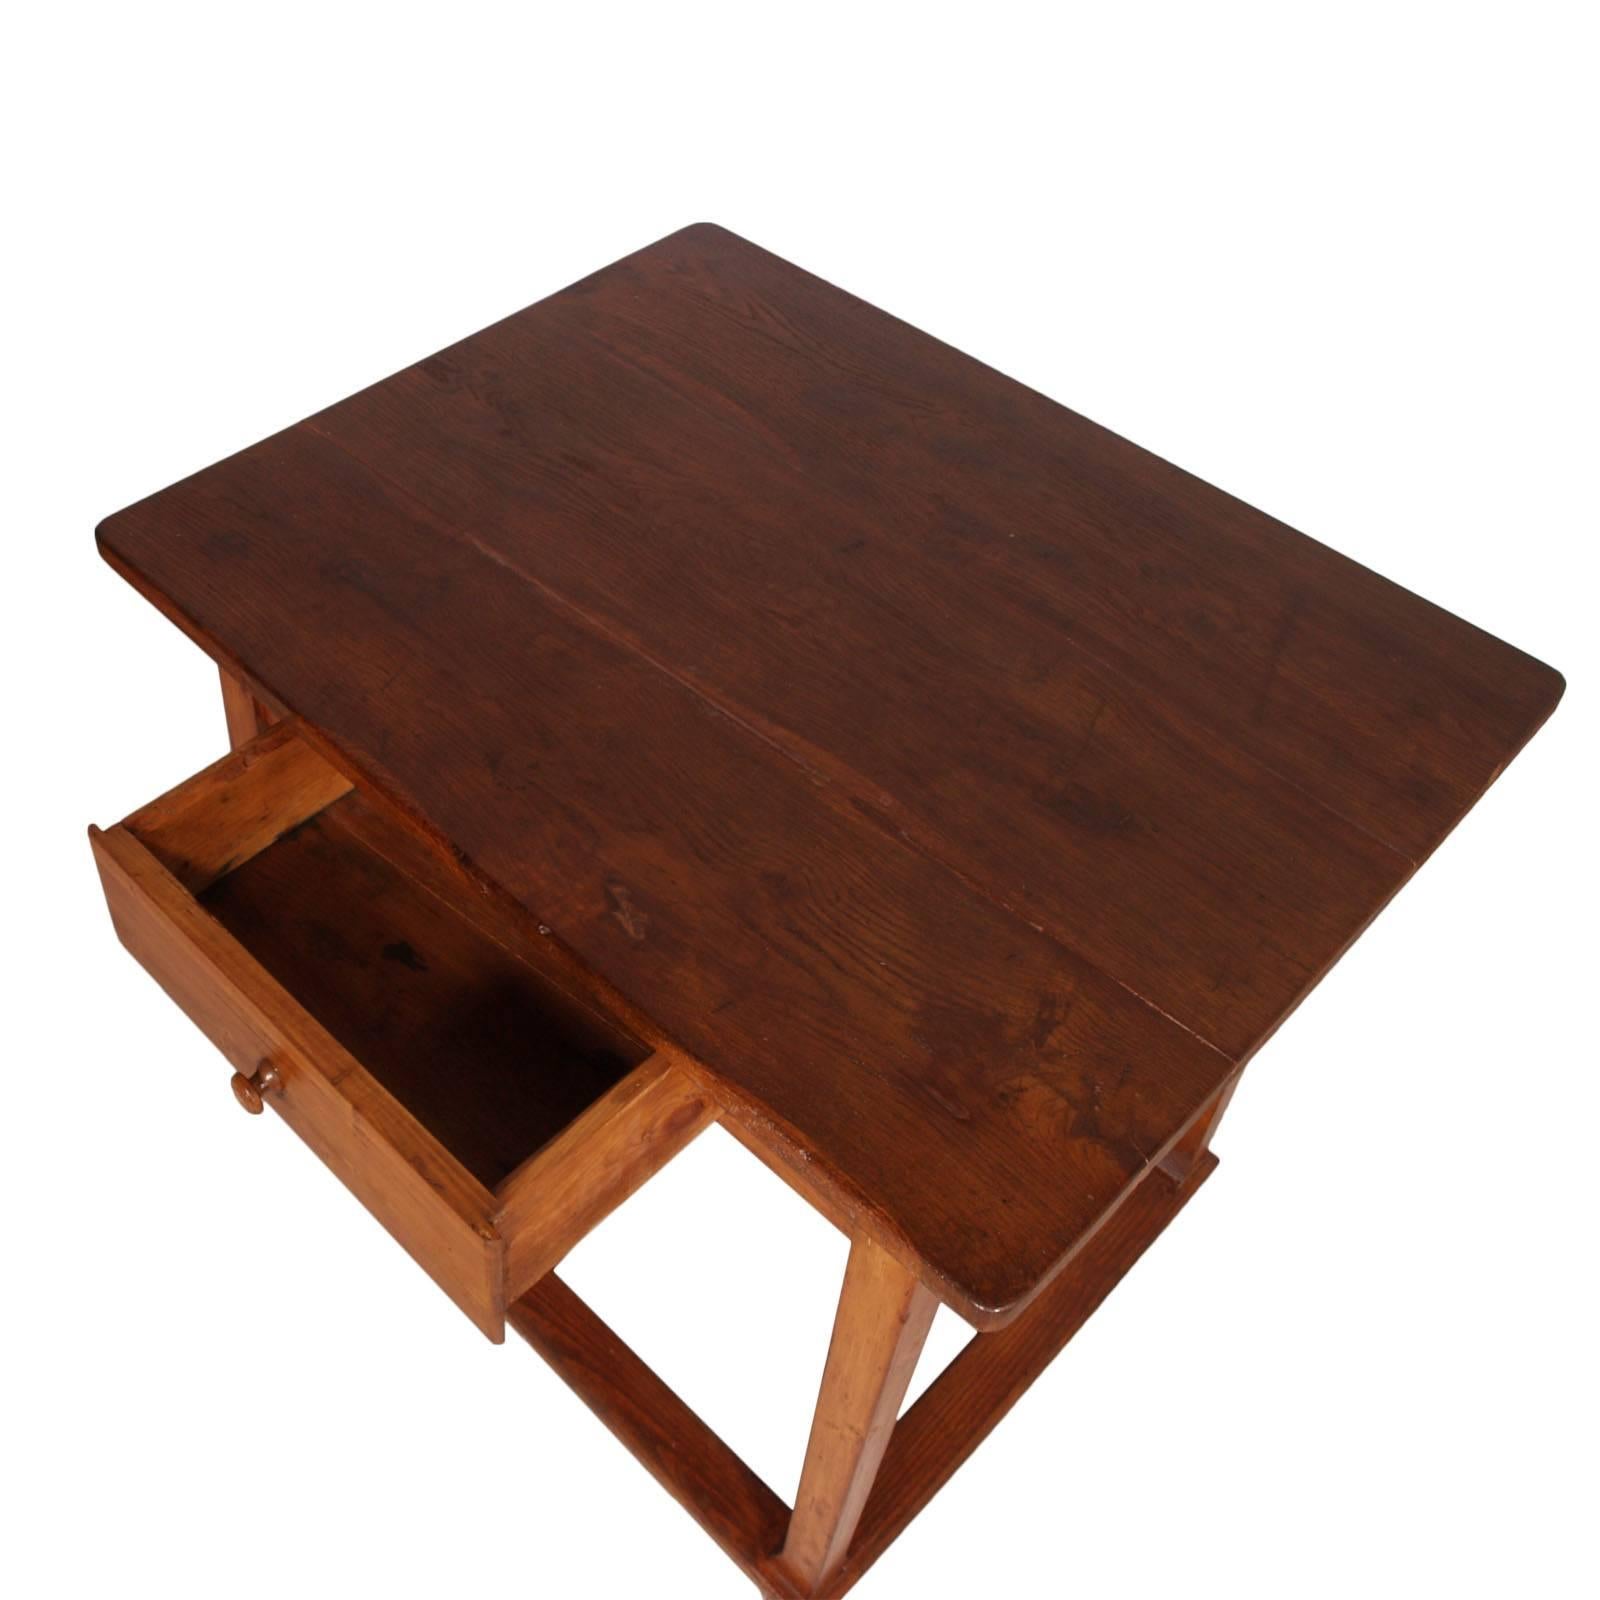 Antique rustic Tyrol desk or working table, in solid wood restored and wax finished
Measures cm: H 78, W 80, D 100.